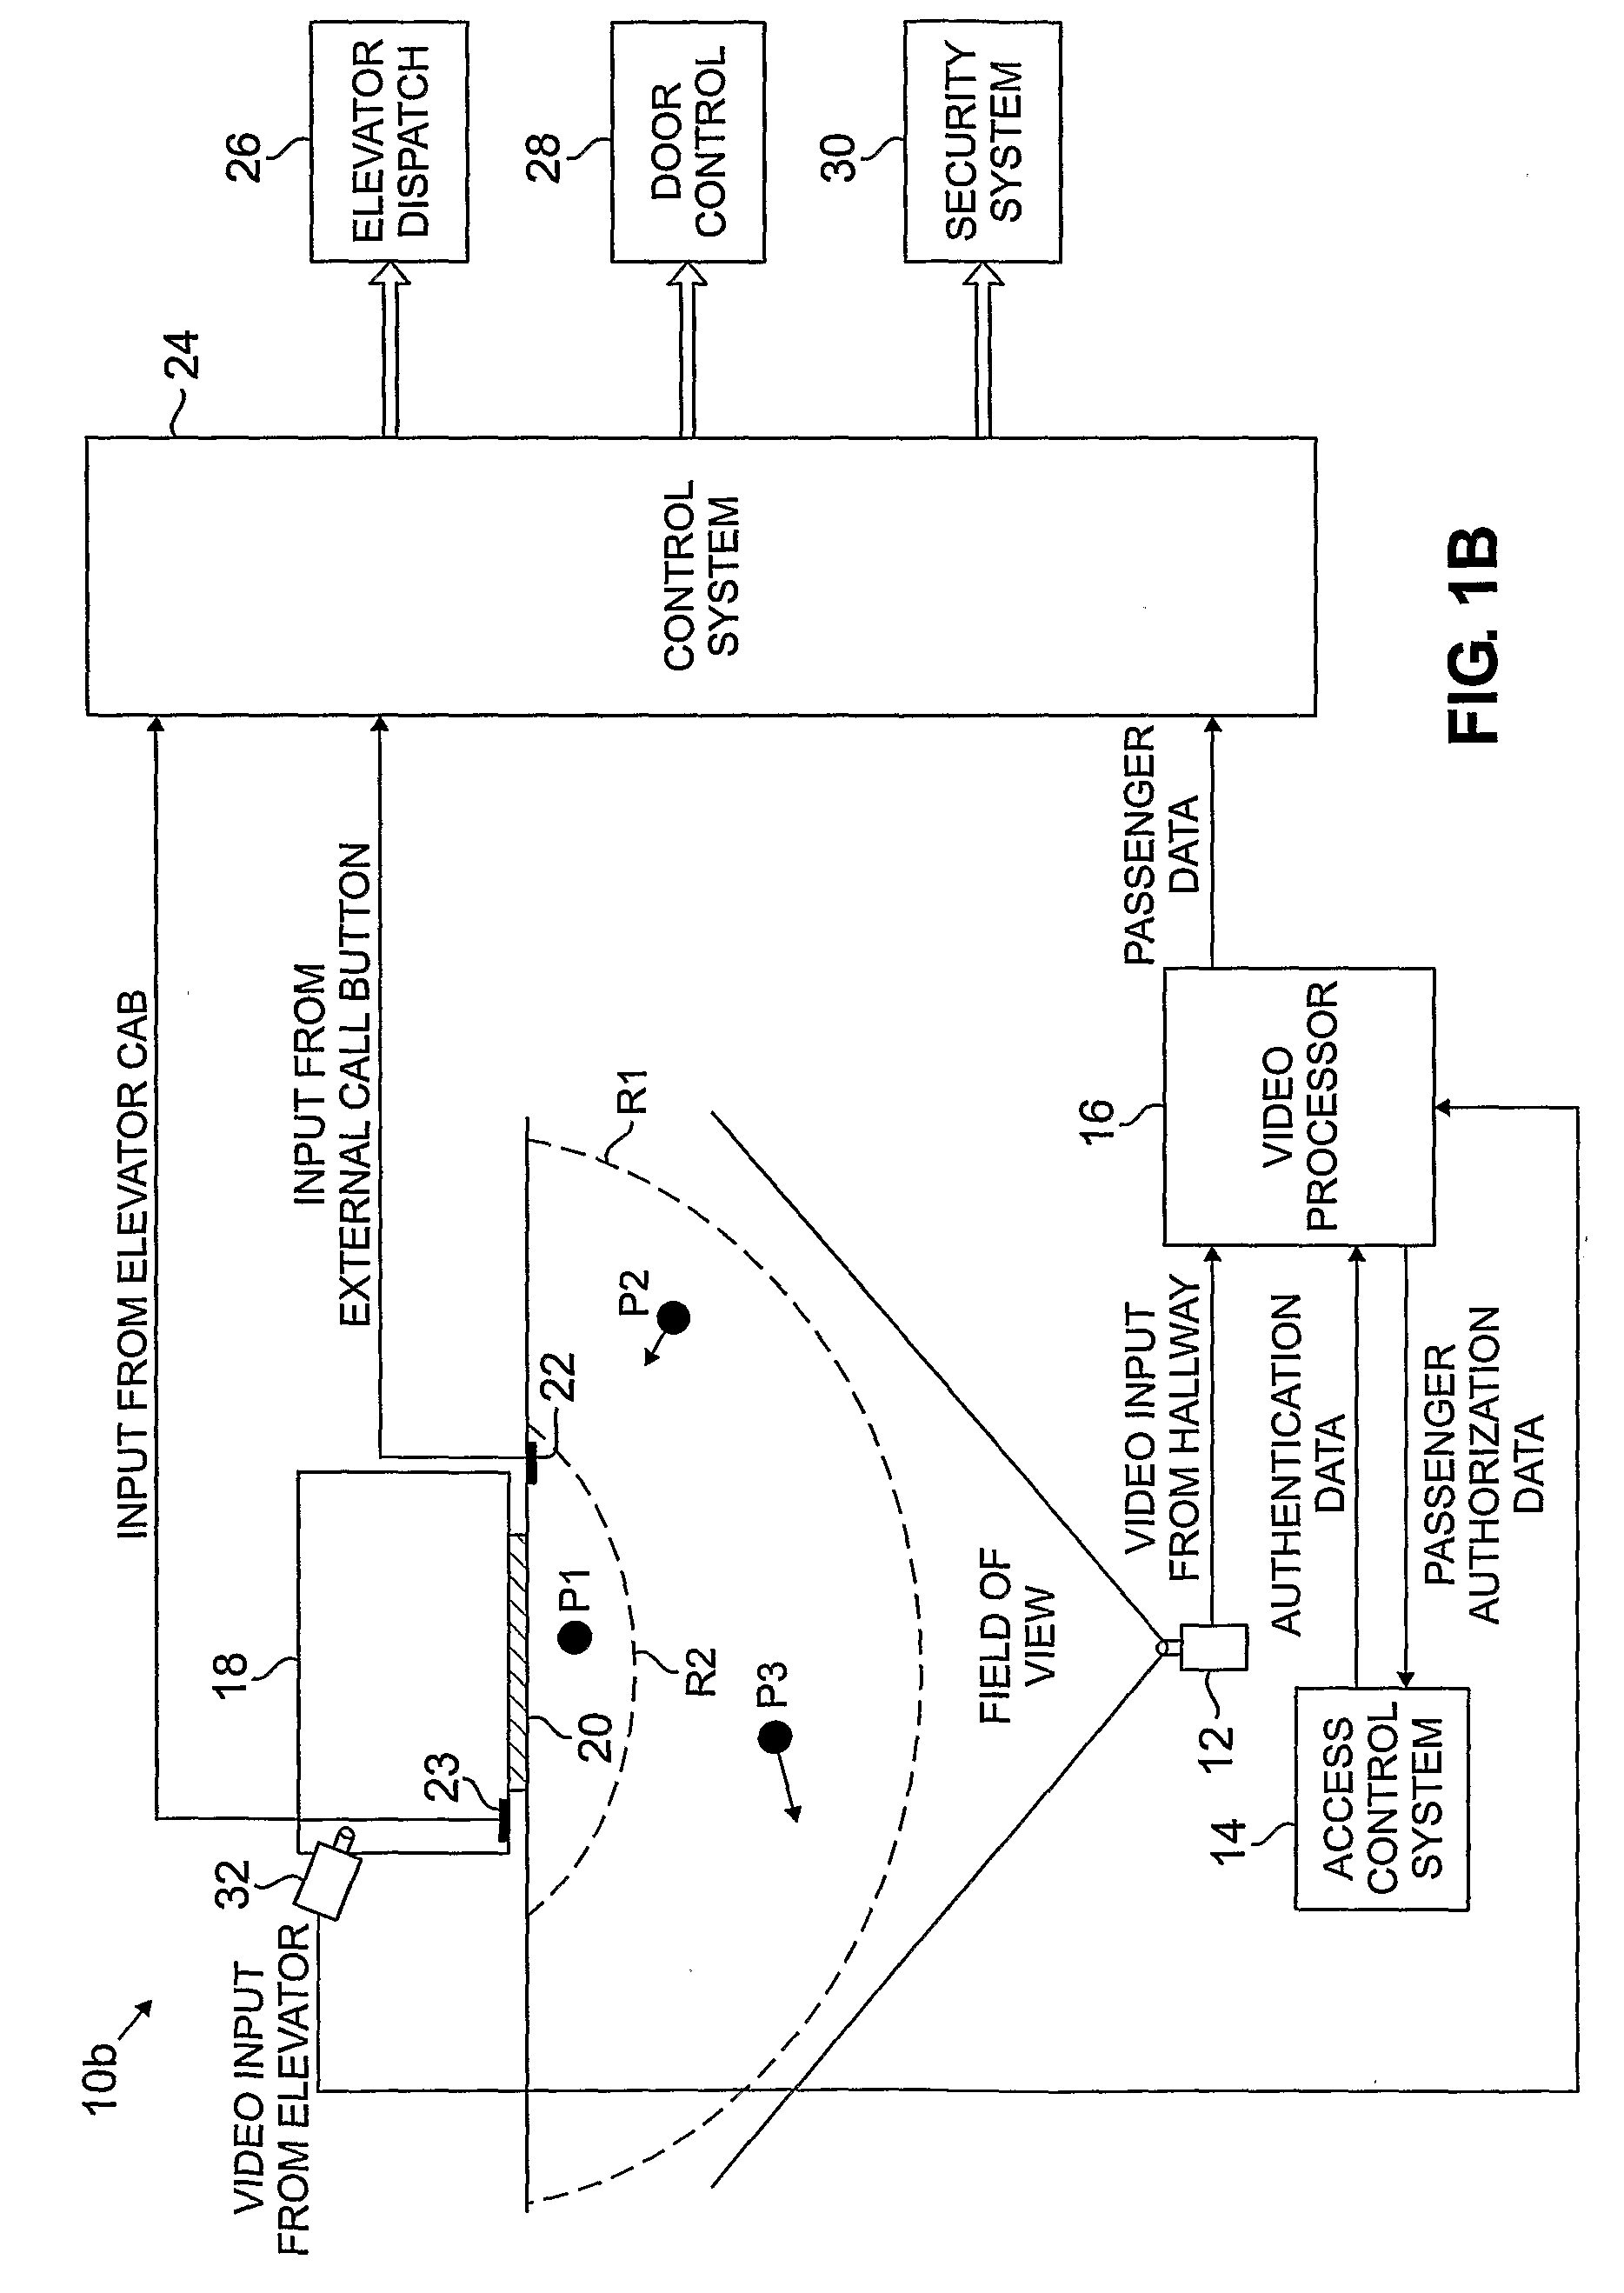 Video aided system for elevator control